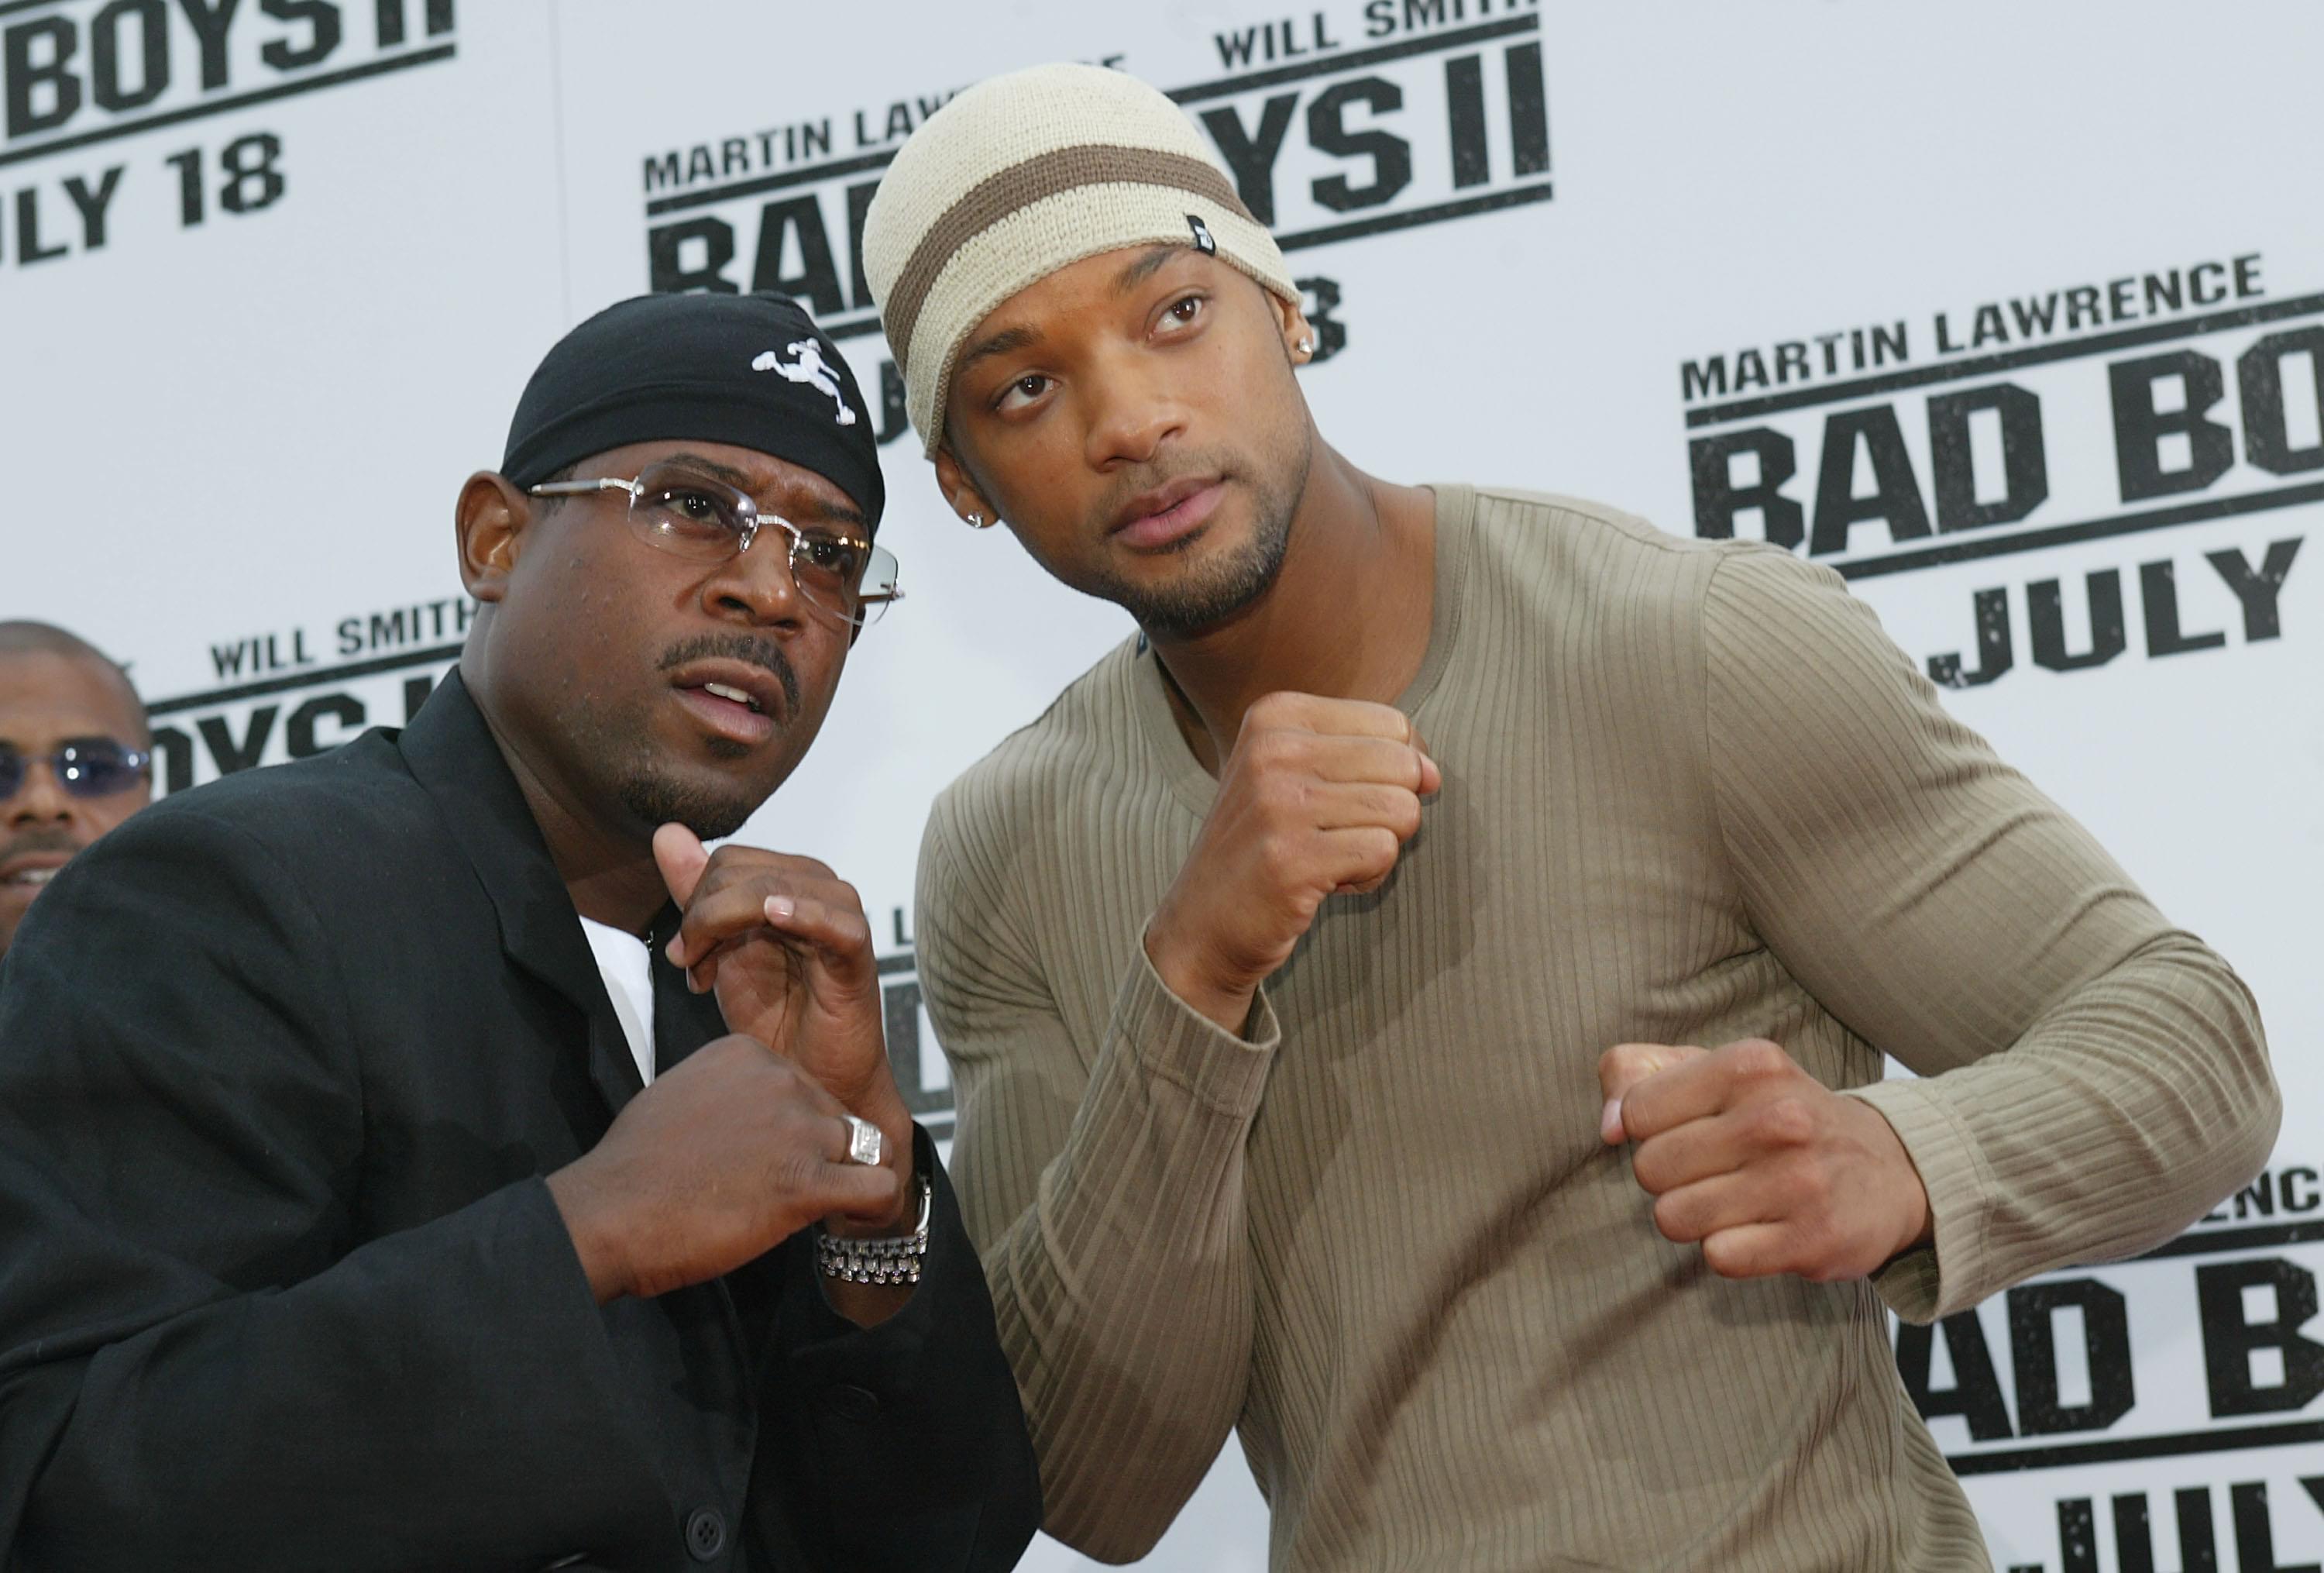 Martin Lawrence And Will Smith Confirm Bad Boys 3